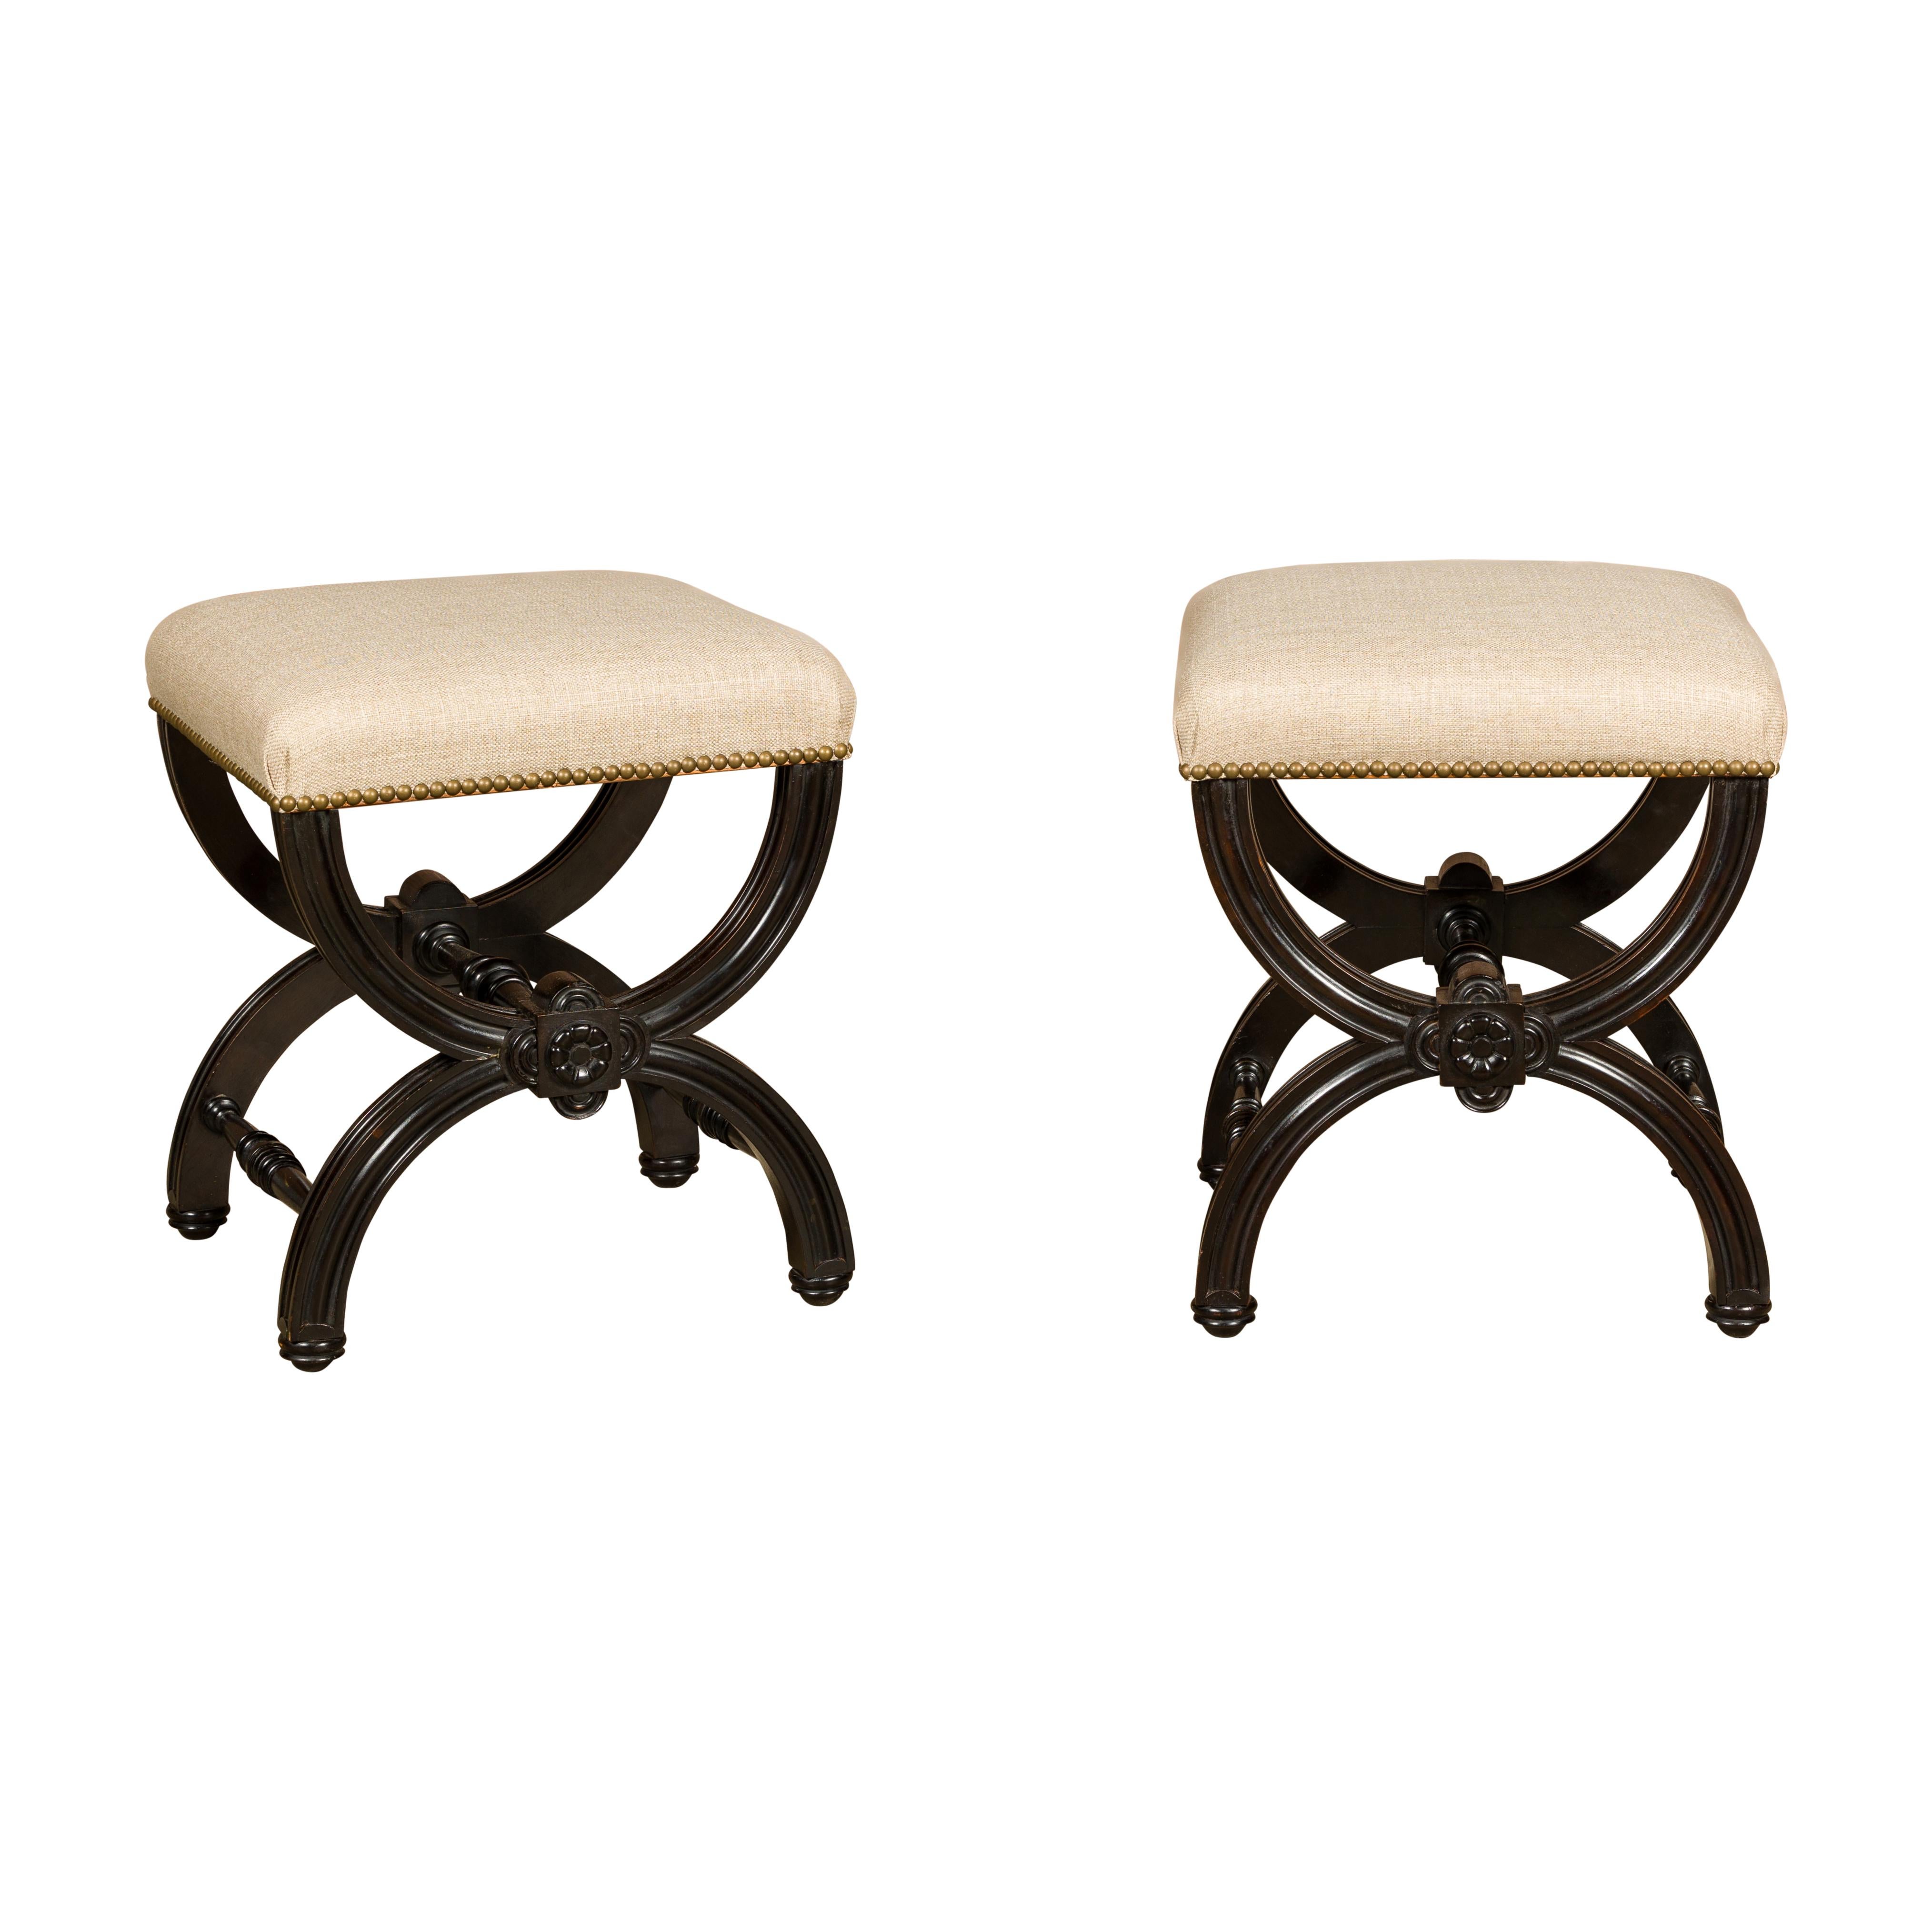 Viennese 1900s Black Stools with X-Form Bases and Custom Upholstery, a Pair For Sale 8